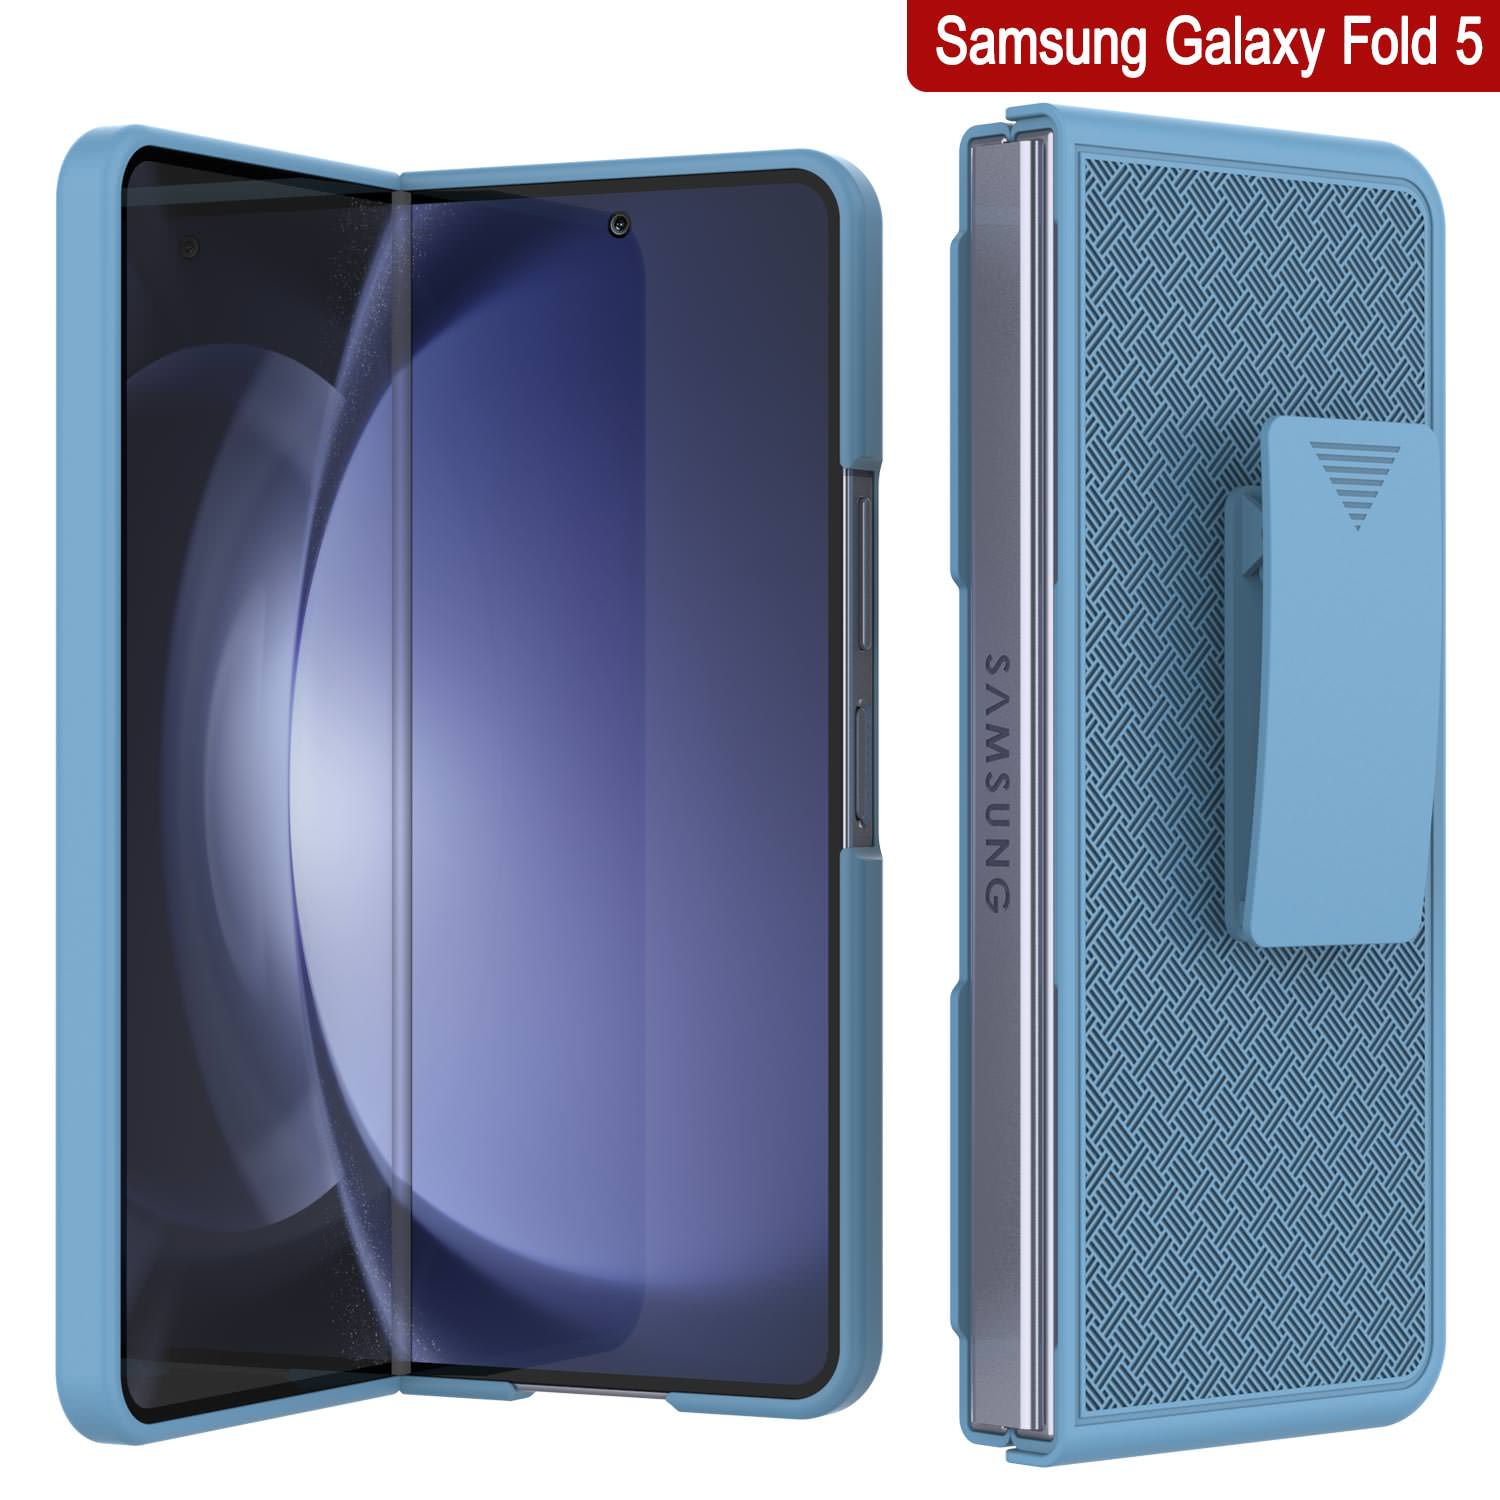 Galaxy Z Fold5 Case With Tempered Glass Screen Protector, Holster Belt Clip & Built-In Kickstand [Blue]